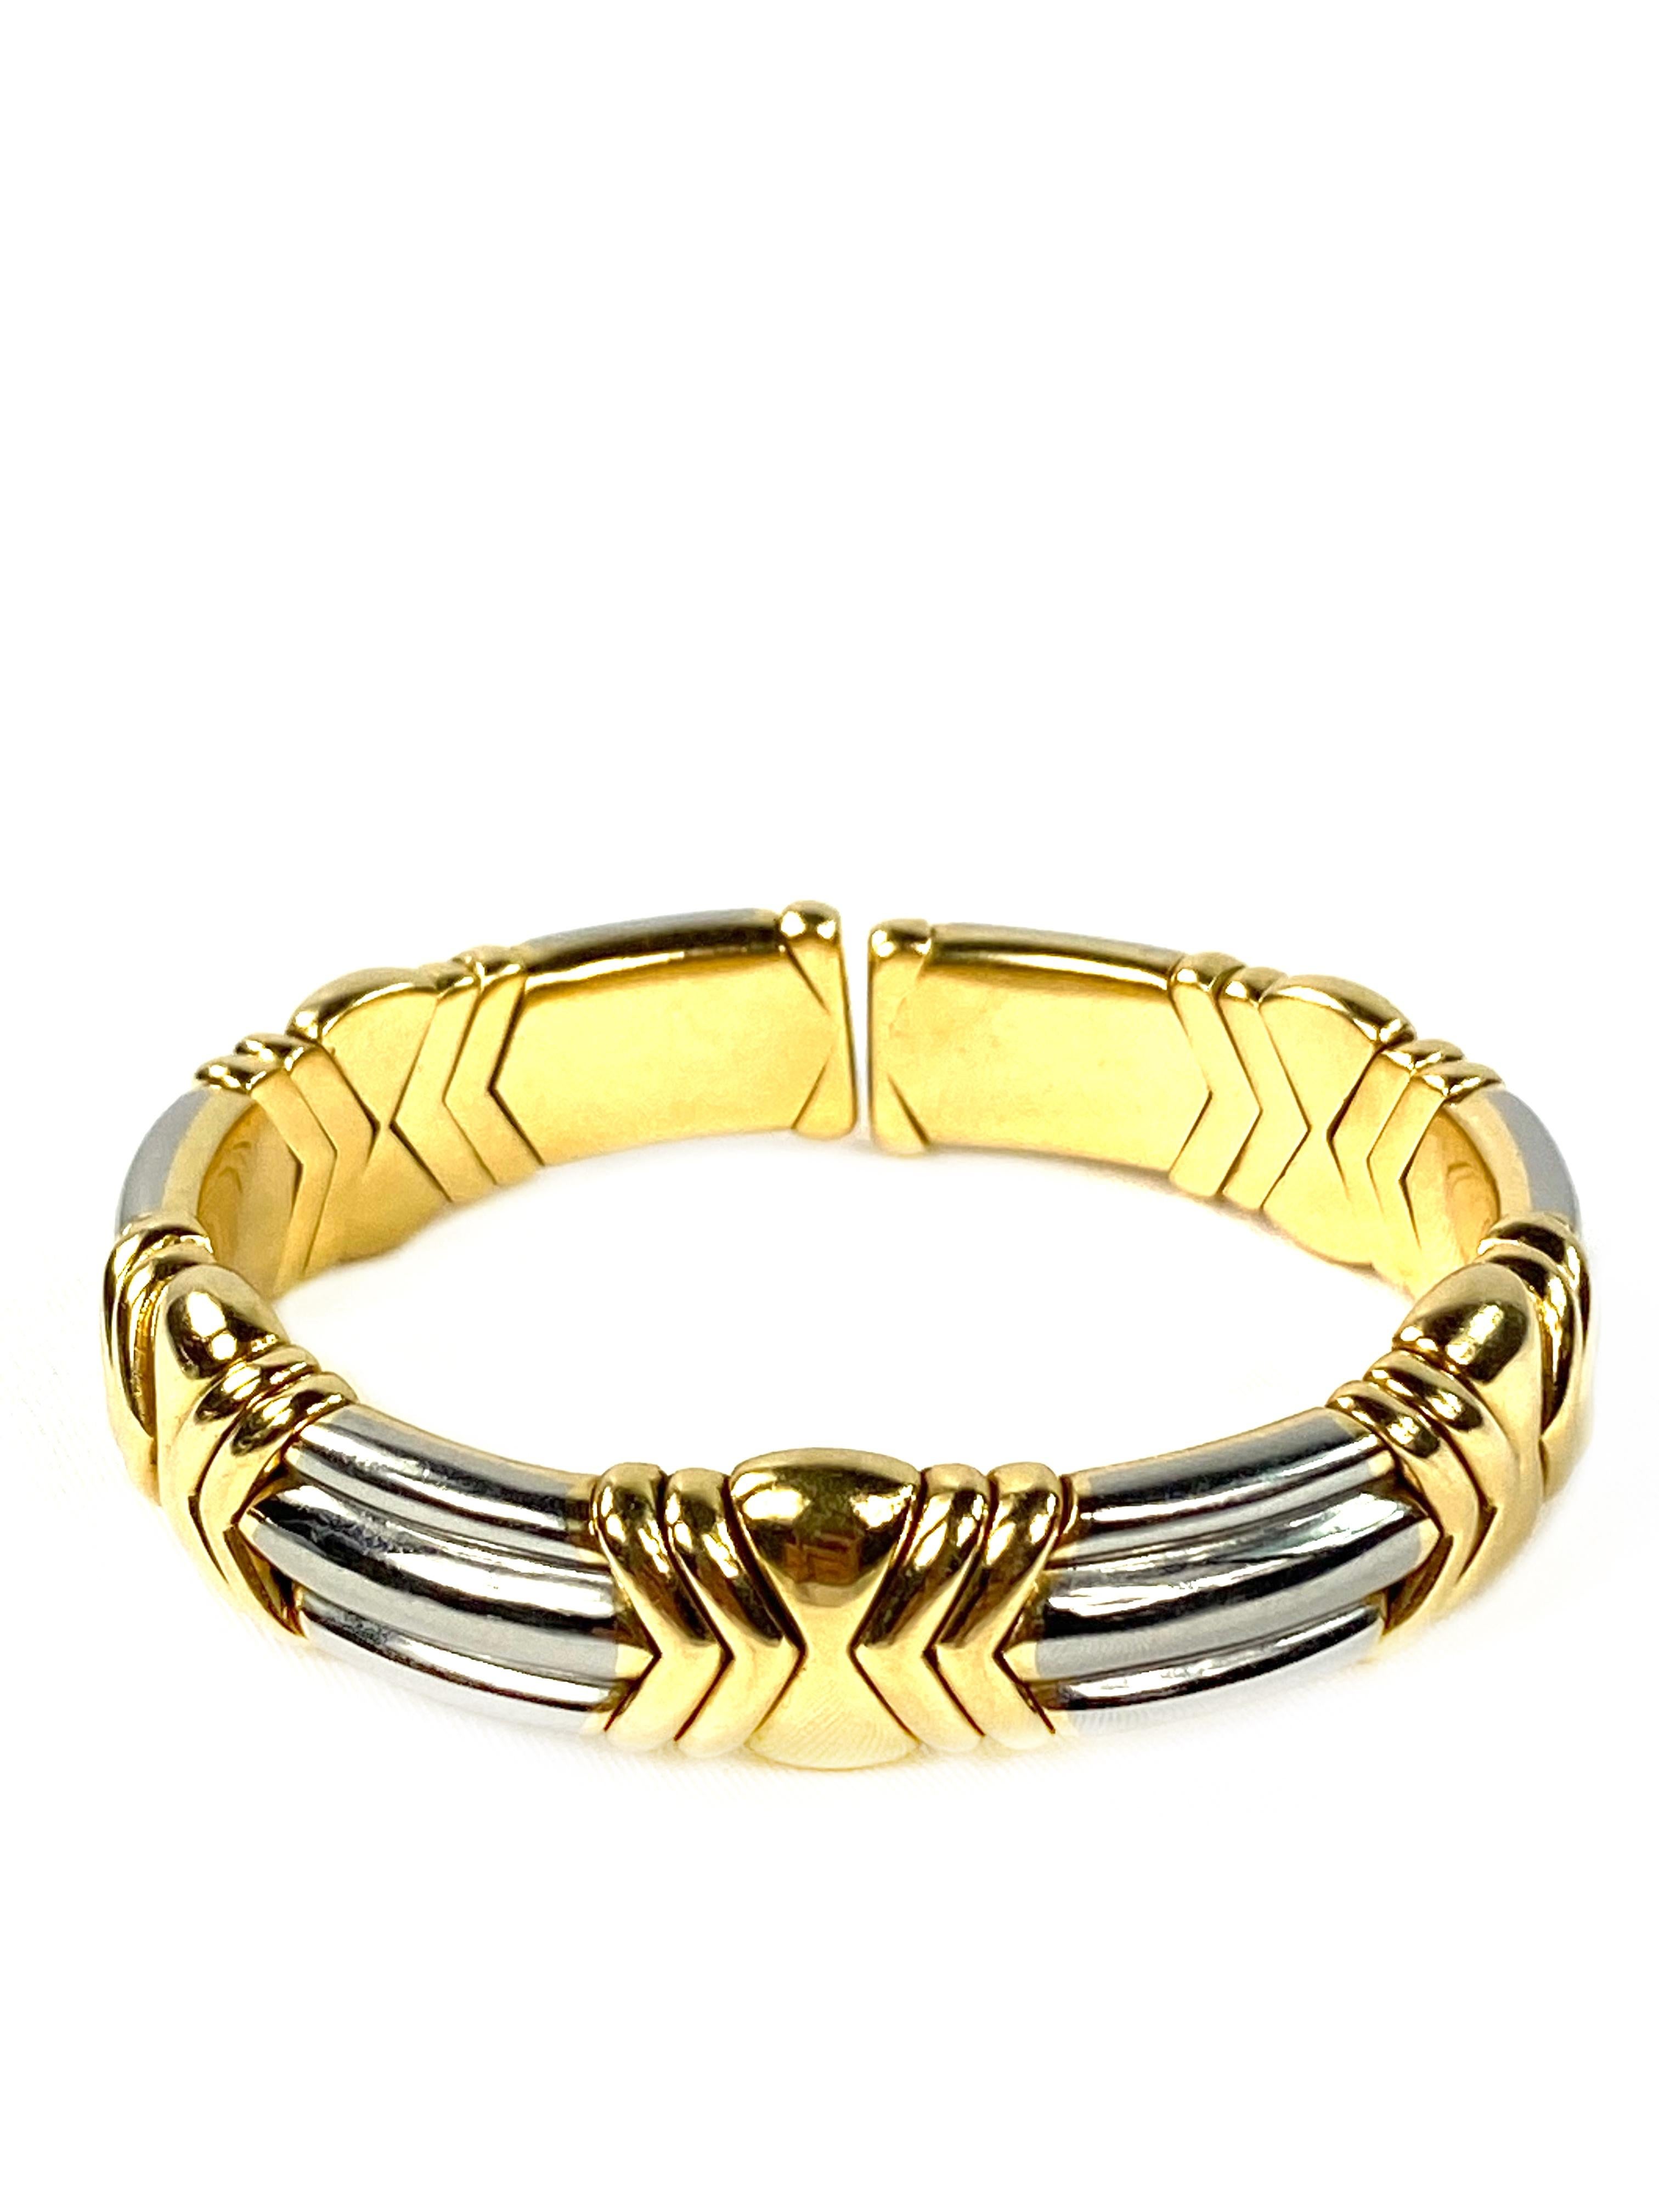 Product details:
Featuring flexible cuff bangle with 18K yellow gold geometric links and stainless steel ribbed links.
Signed BVLGARI, stamped 750, serial number is 7589.
Measurement: diameter is 3